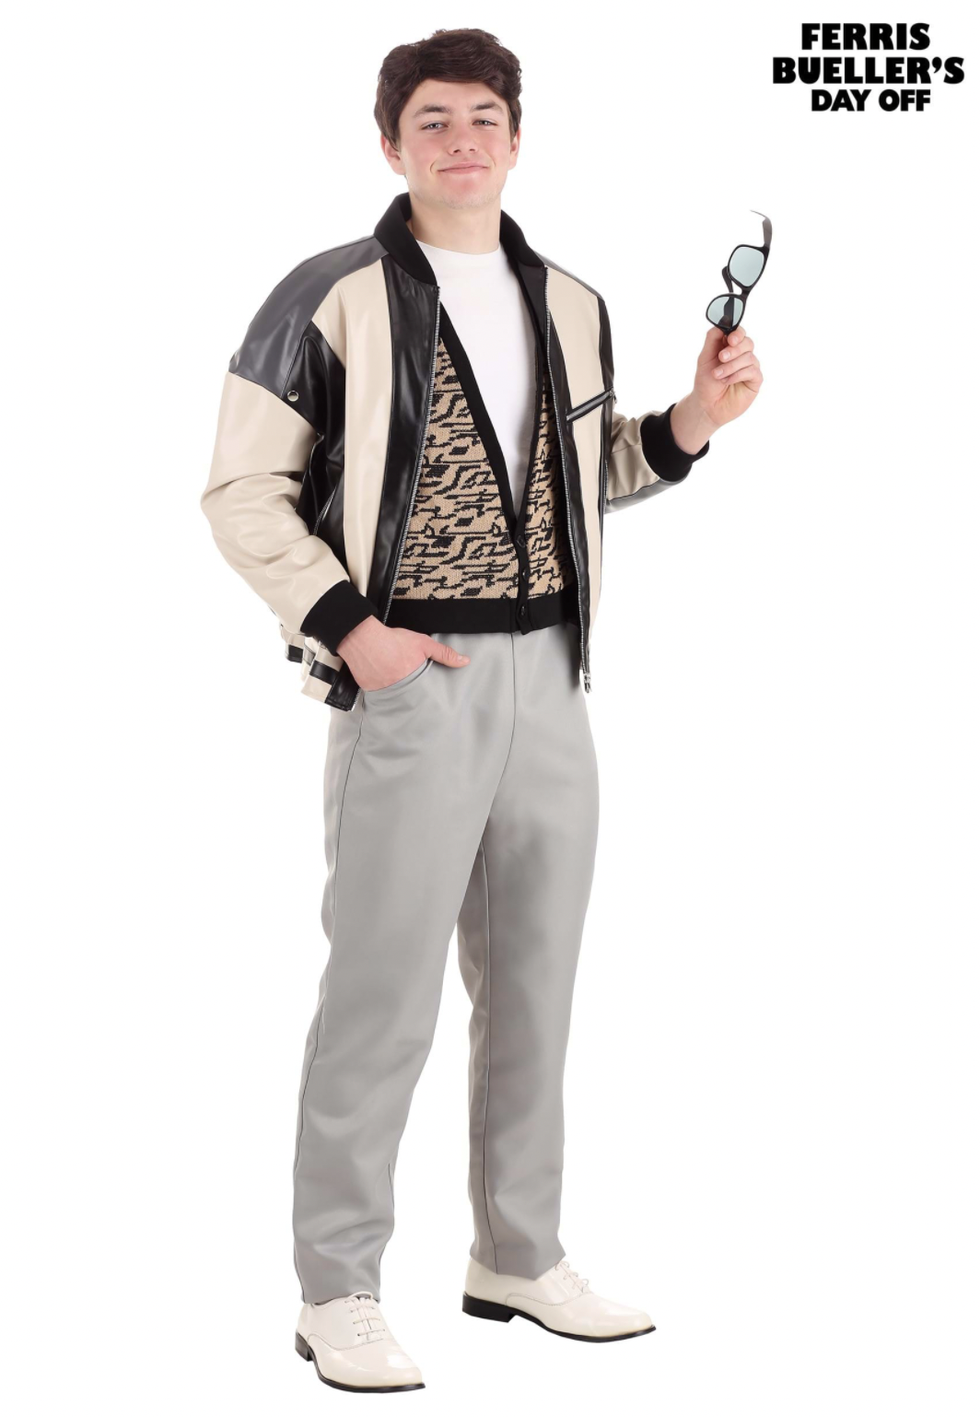 Back to the 80s: The Best 80s Costumes -  Blog